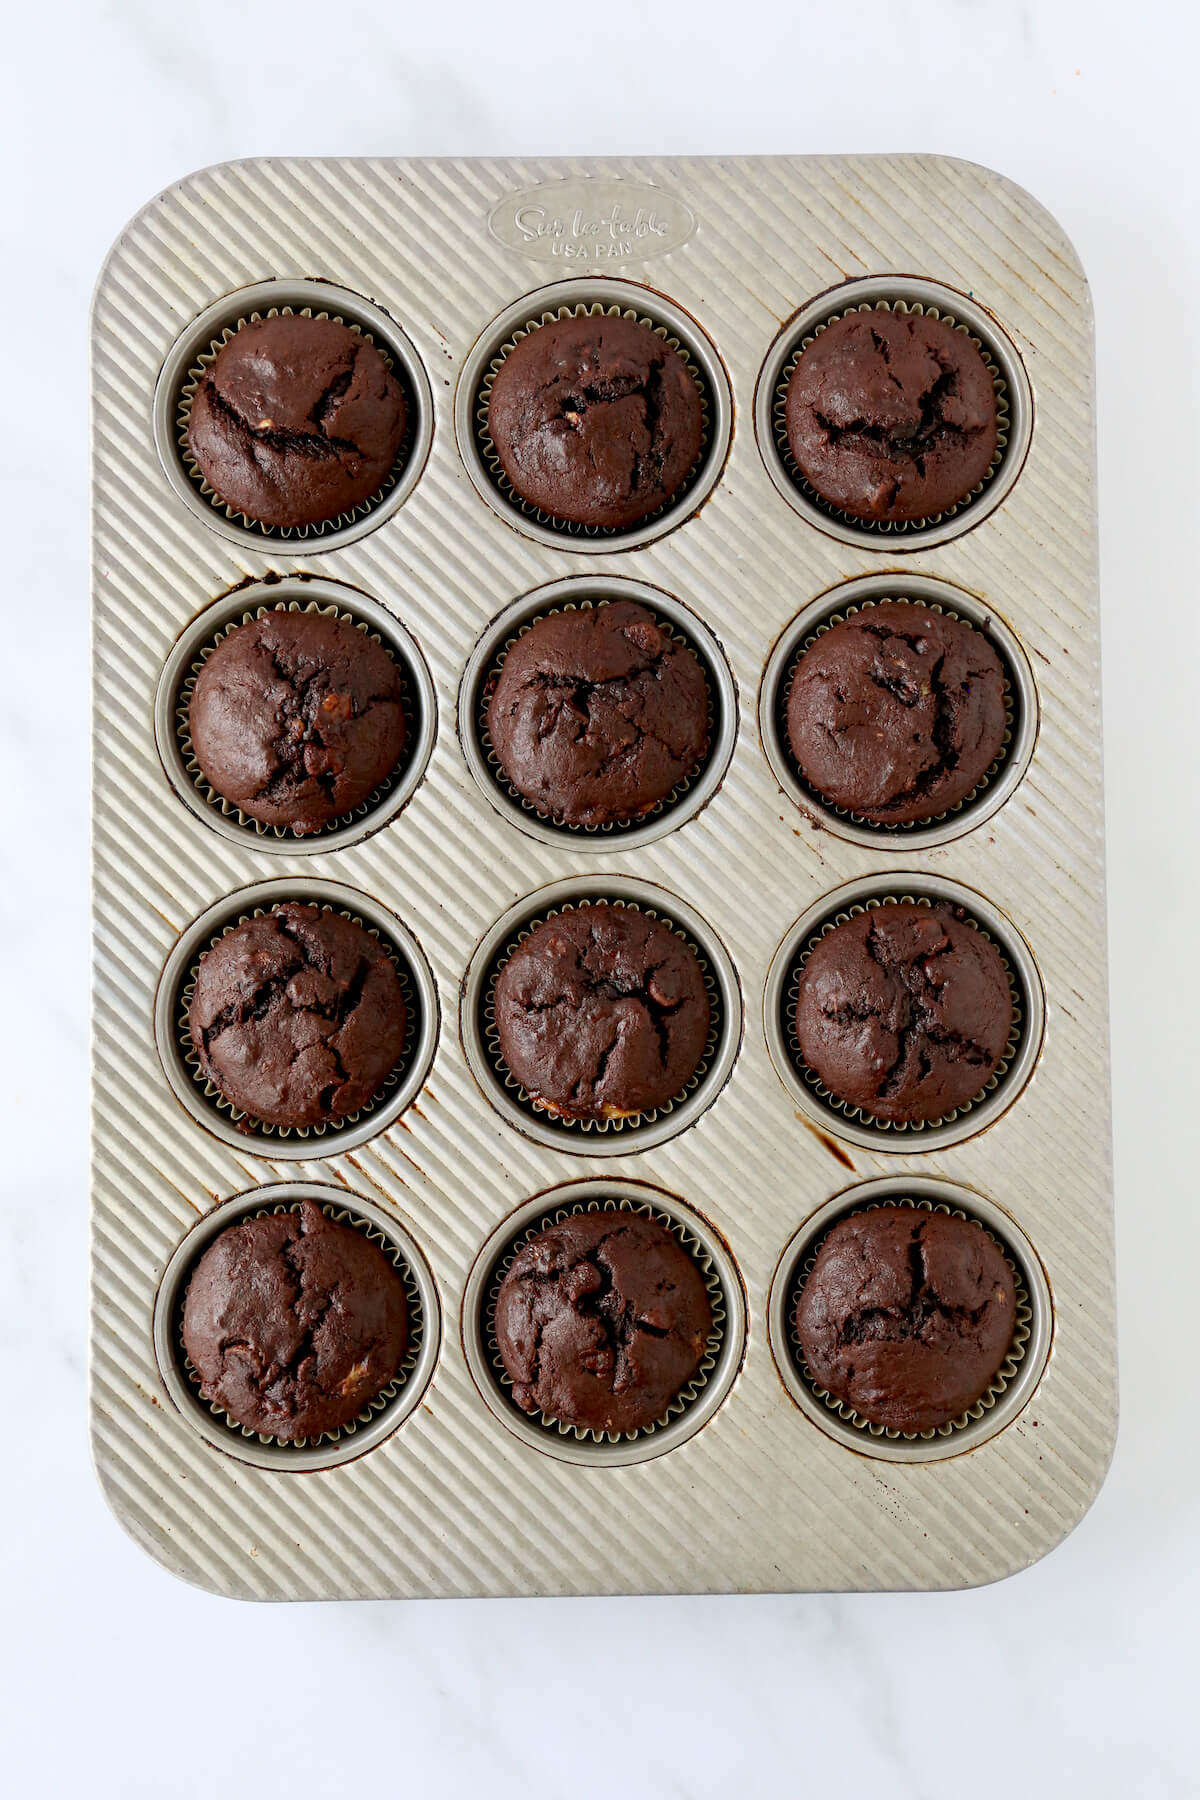 Twelve baked chocolate muffins in a muffin pan.  